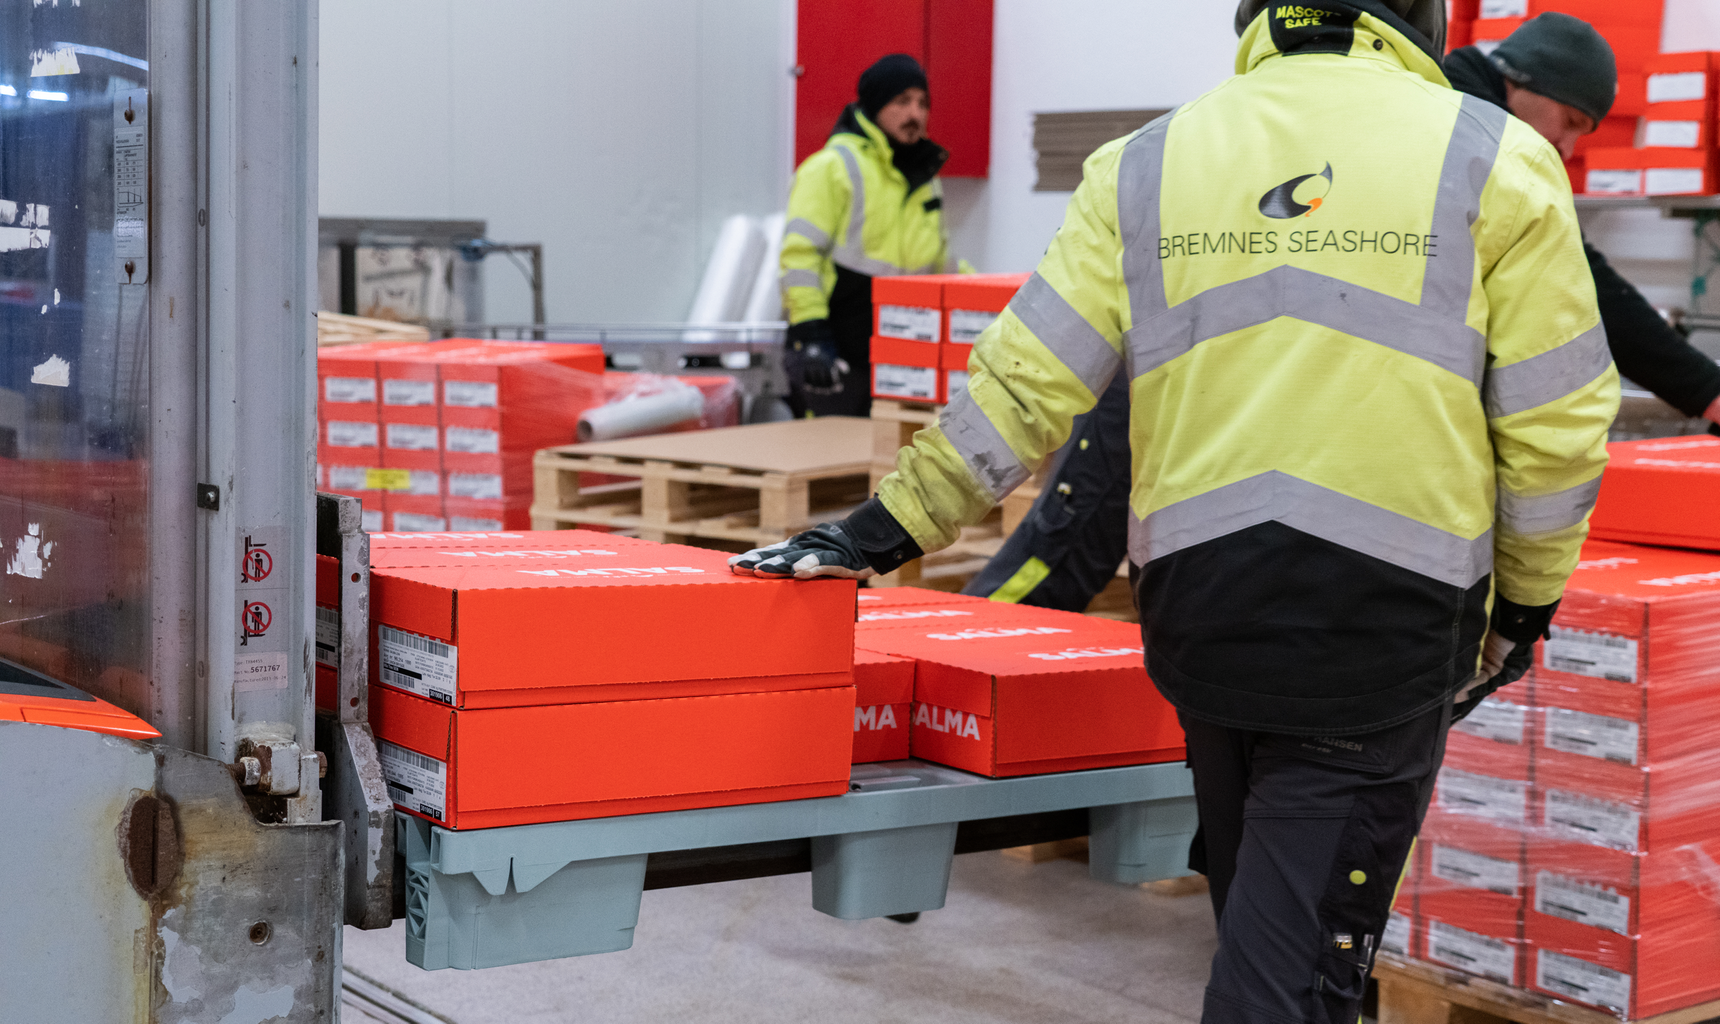 Norwegian salmon producer Bremnes, famous for several strong seafood brands like "SALMA" and "BÖMLO", is testing innovative, reusable pallets, made from 100% marine plastic waste.